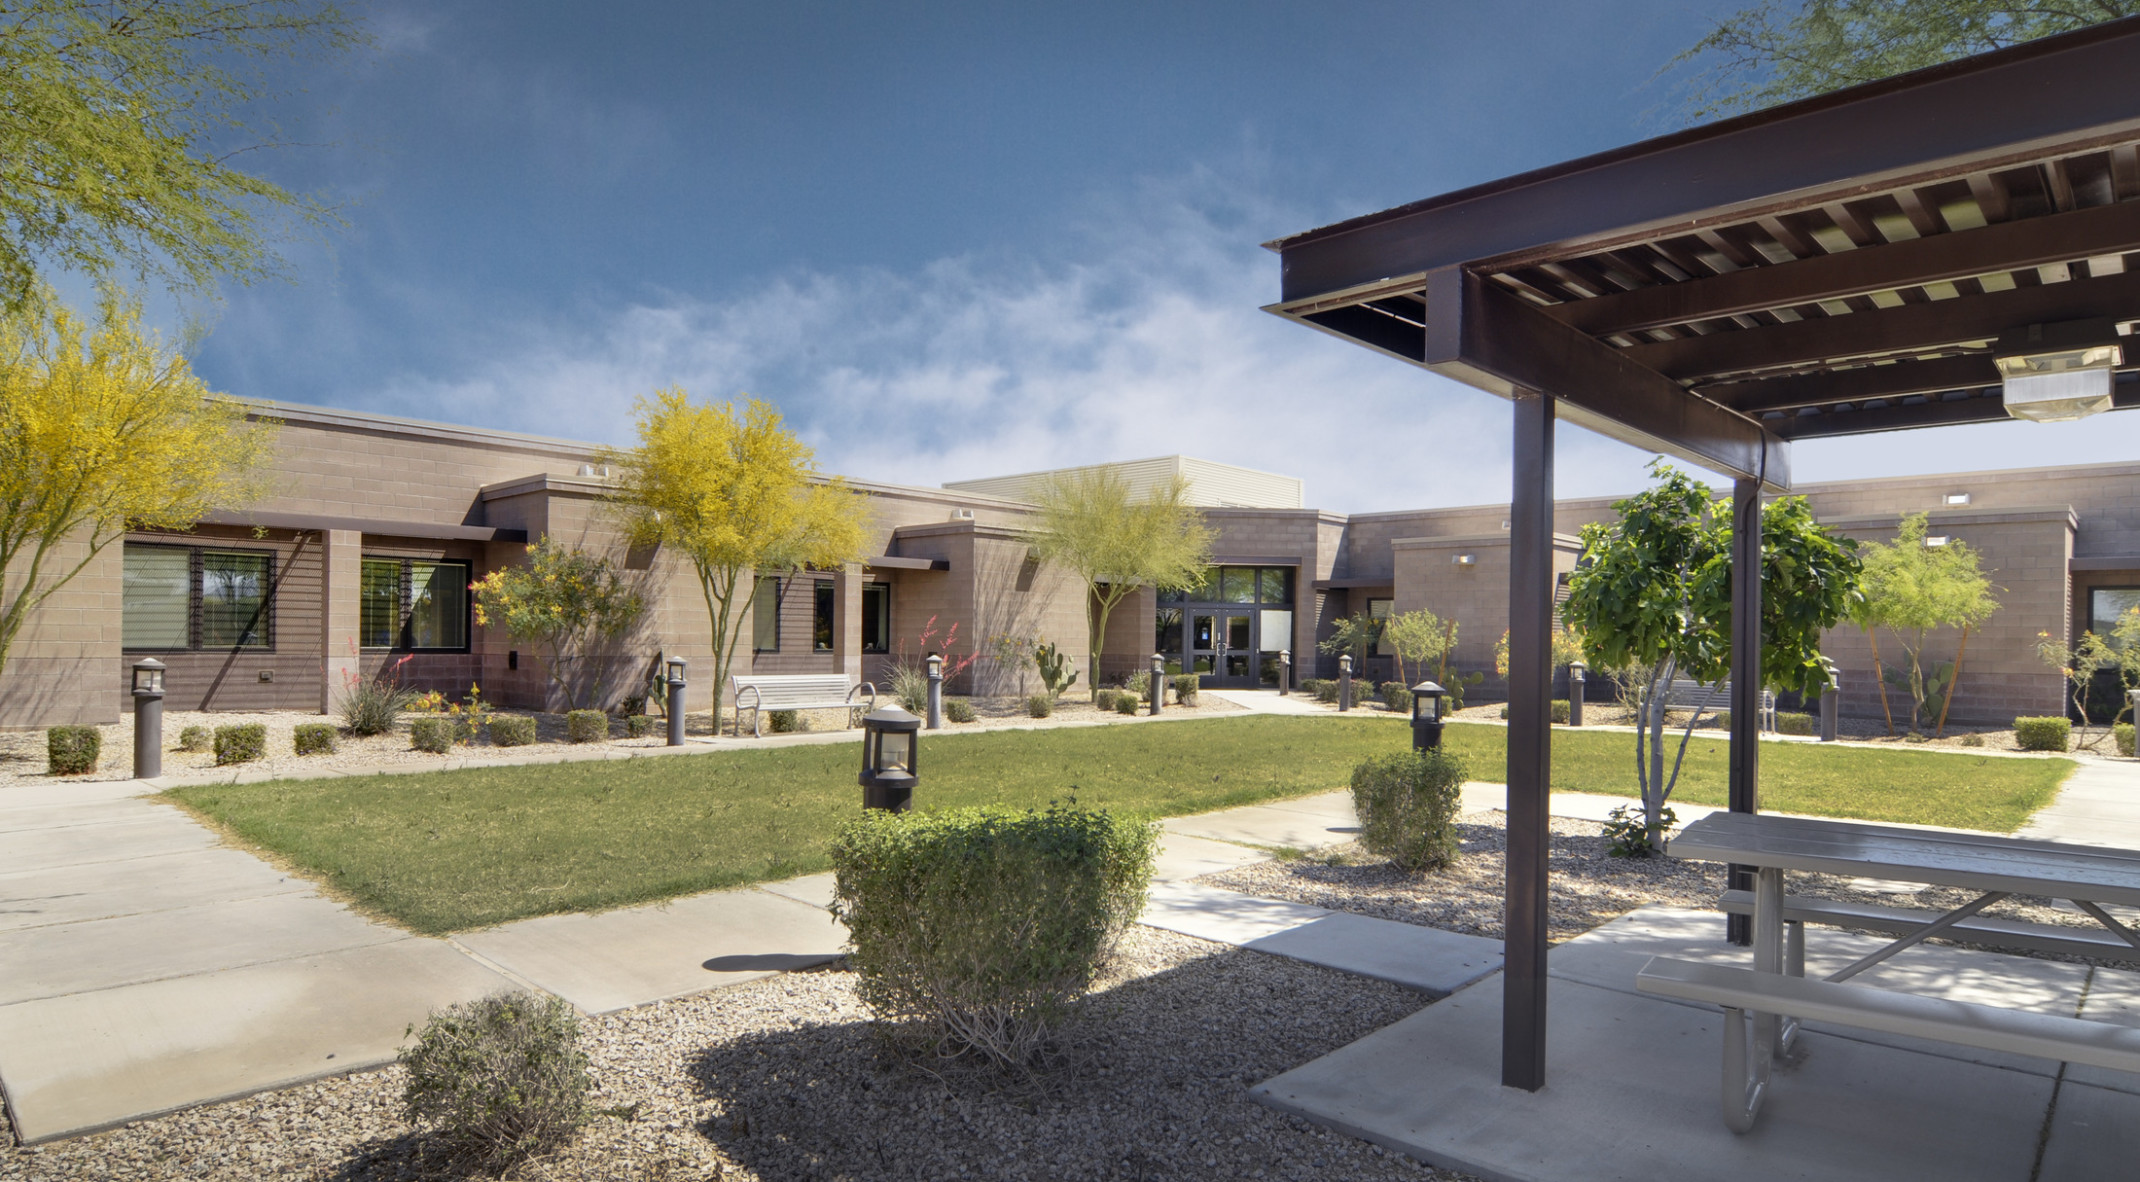 Rendering of Gila River Skilled Nursing Facility stone exterior viewed from courtyard